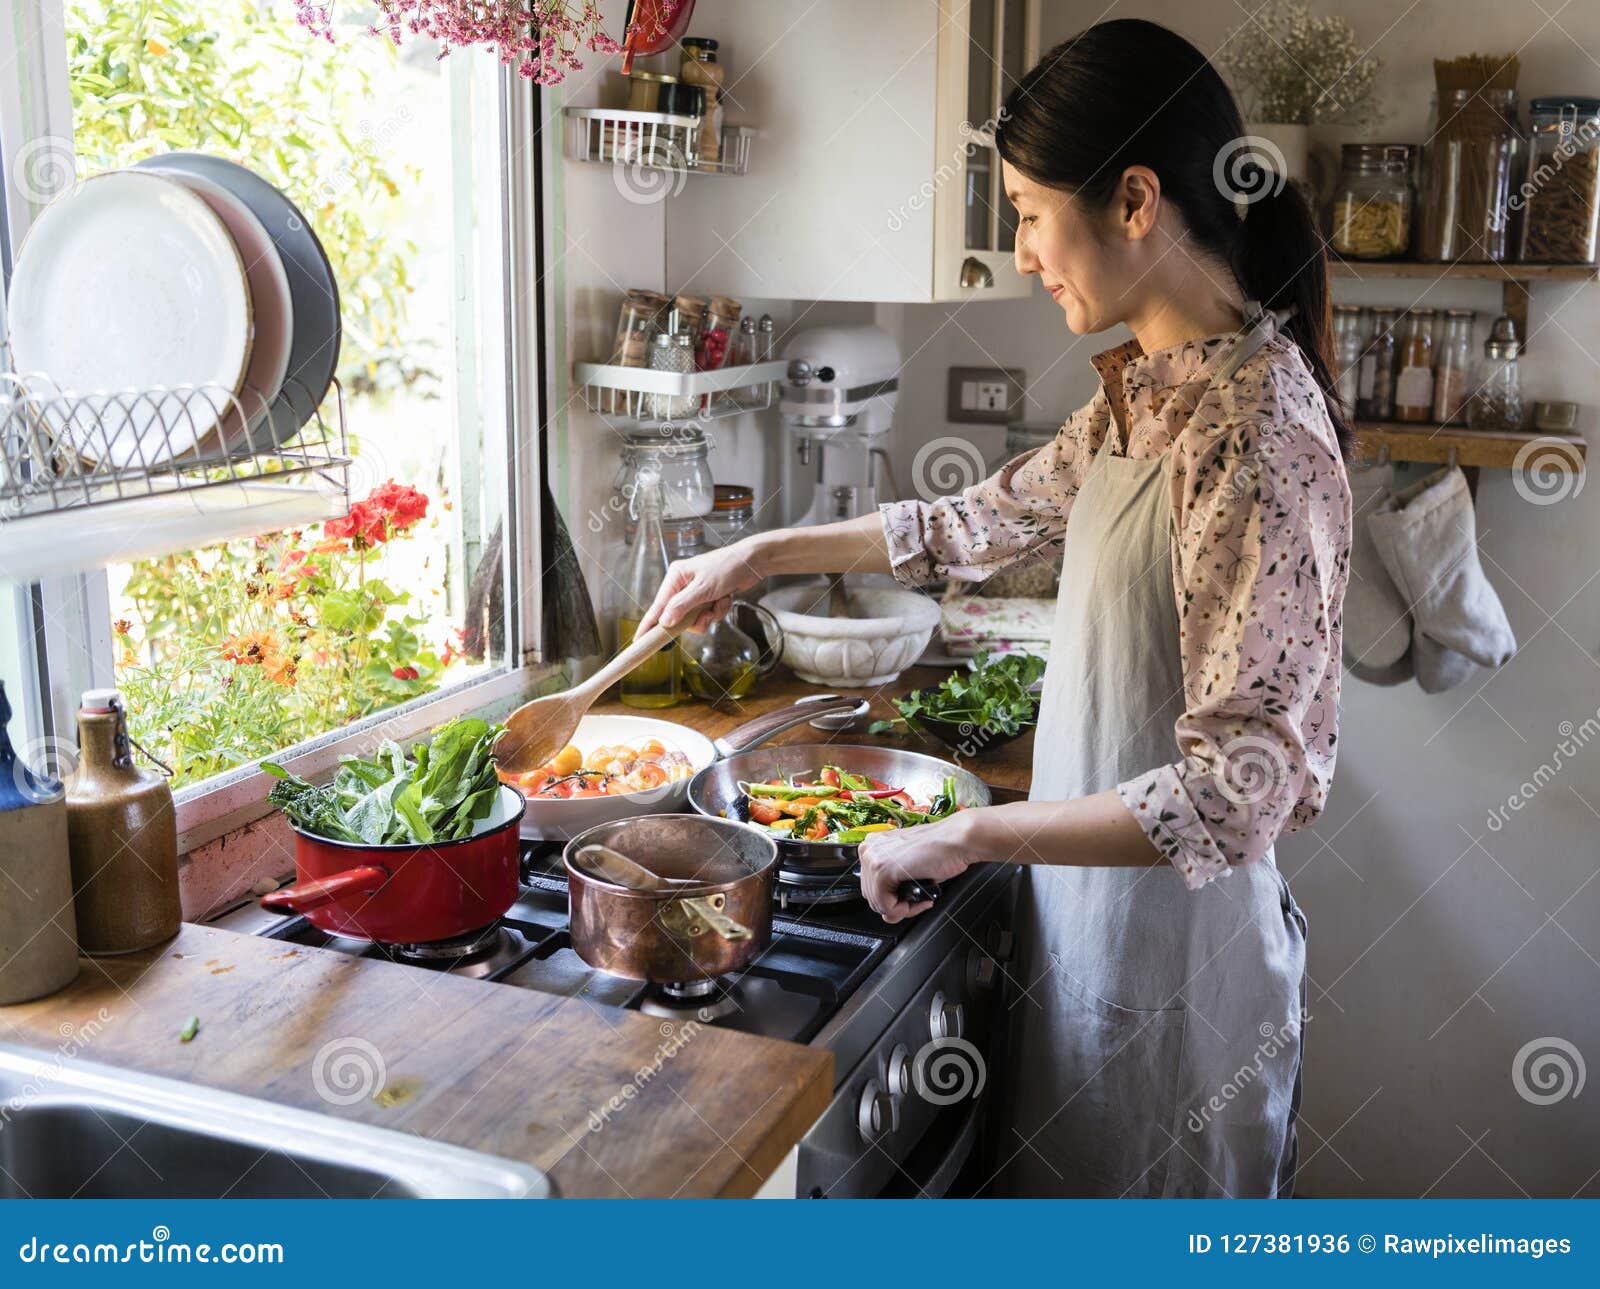 https://thumbs.dreamstime.com/z/woman-cooking-lunch-kitchen-woman-cooking-lunch-kitchen-127381936.jpg